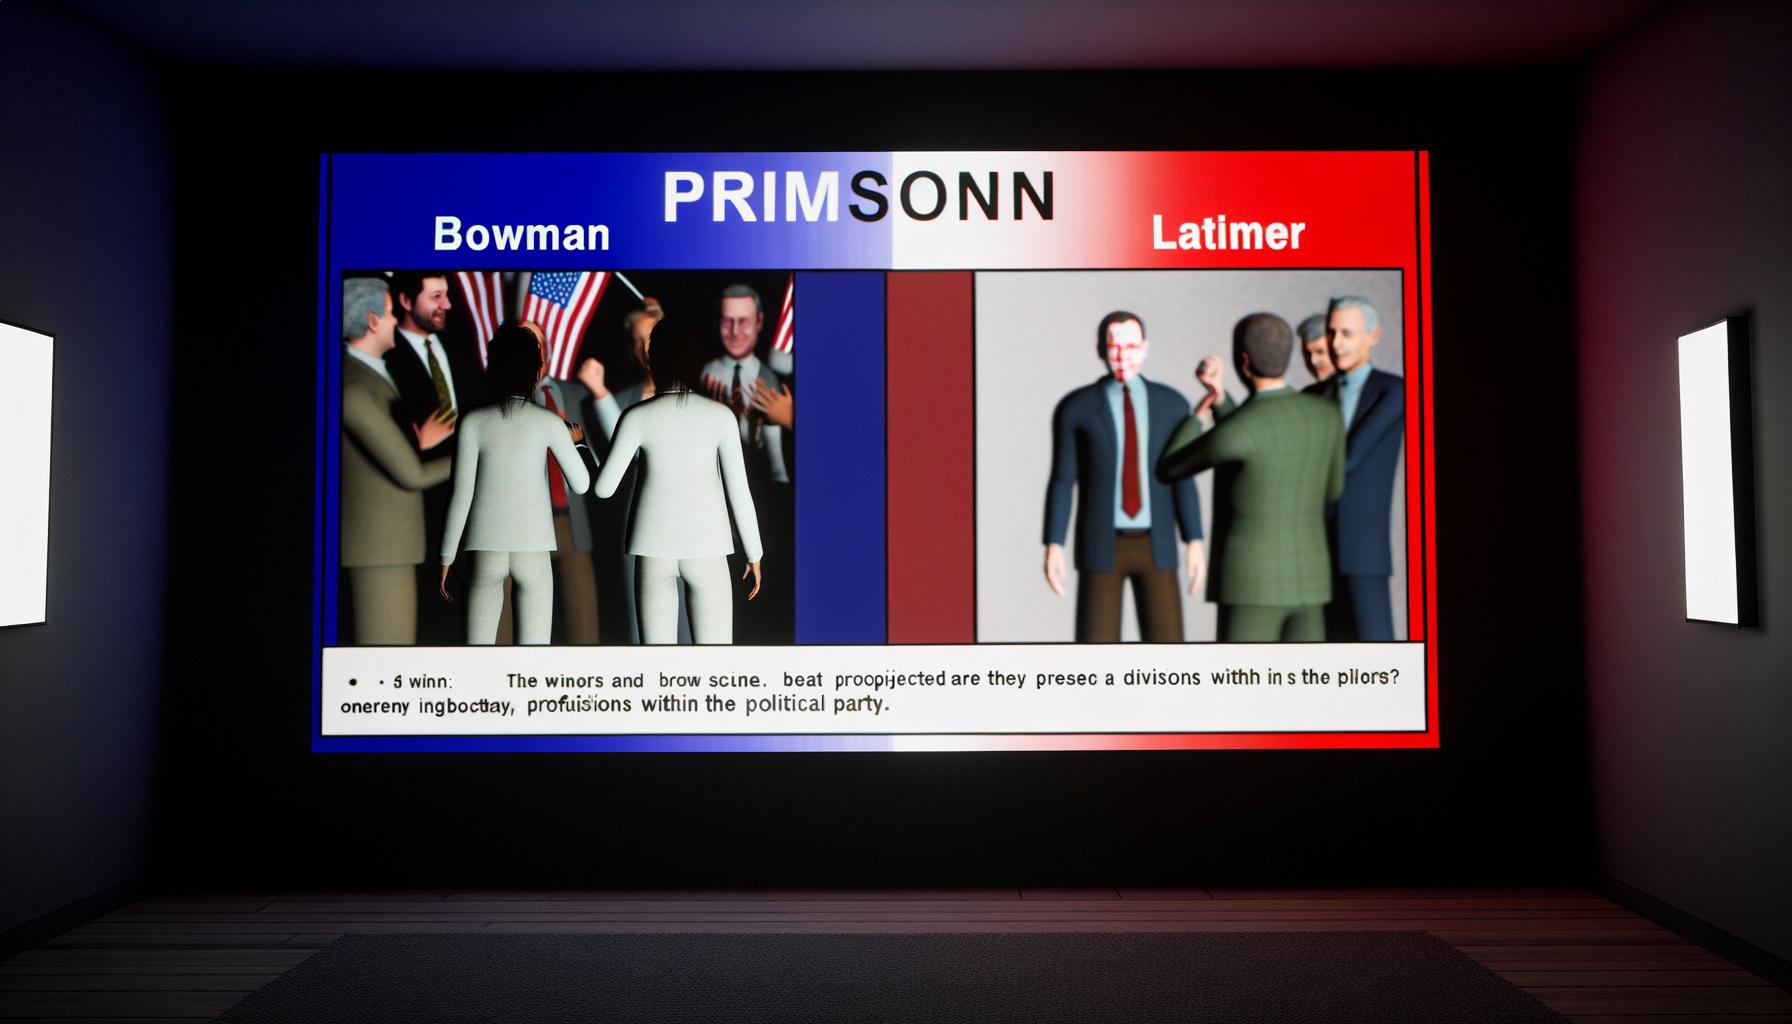 Bowman loses primary to Latimer, highlighting Democratic Party divisions Balanced News